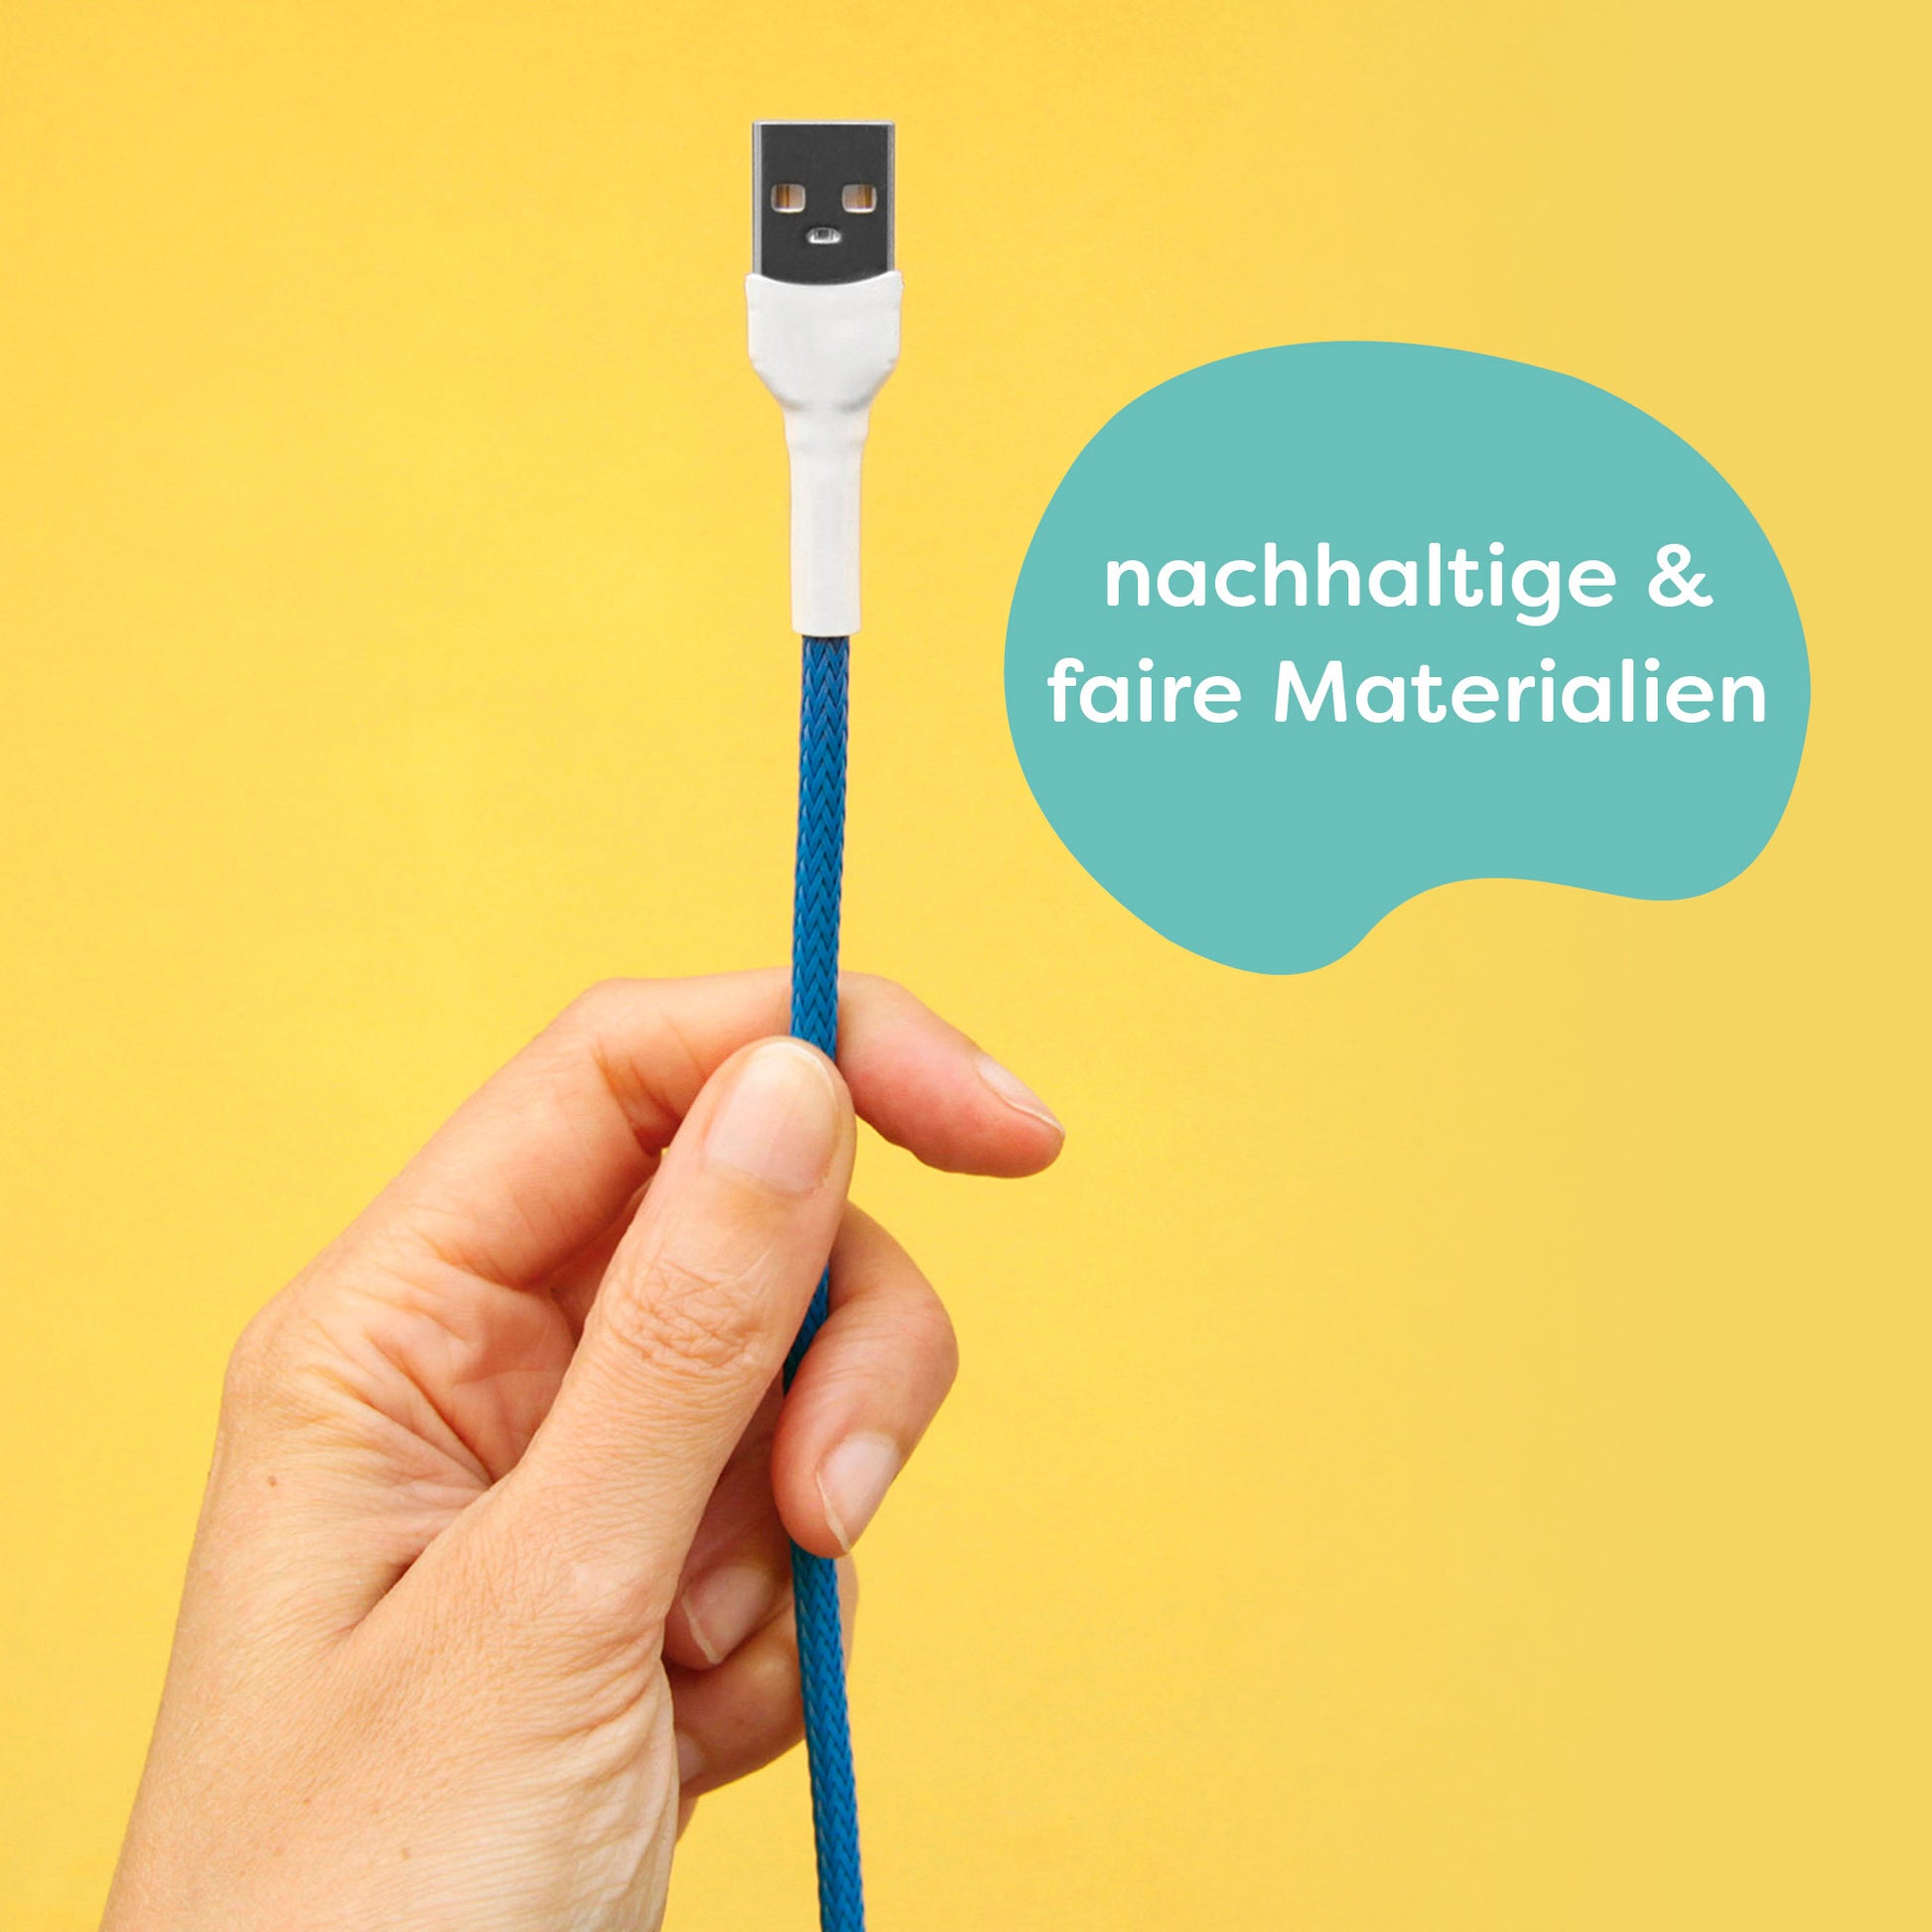 Sustainable and fair materials are used for the production. Illustration: A recable is shown together with a USB-A connector in the colors blue and white.